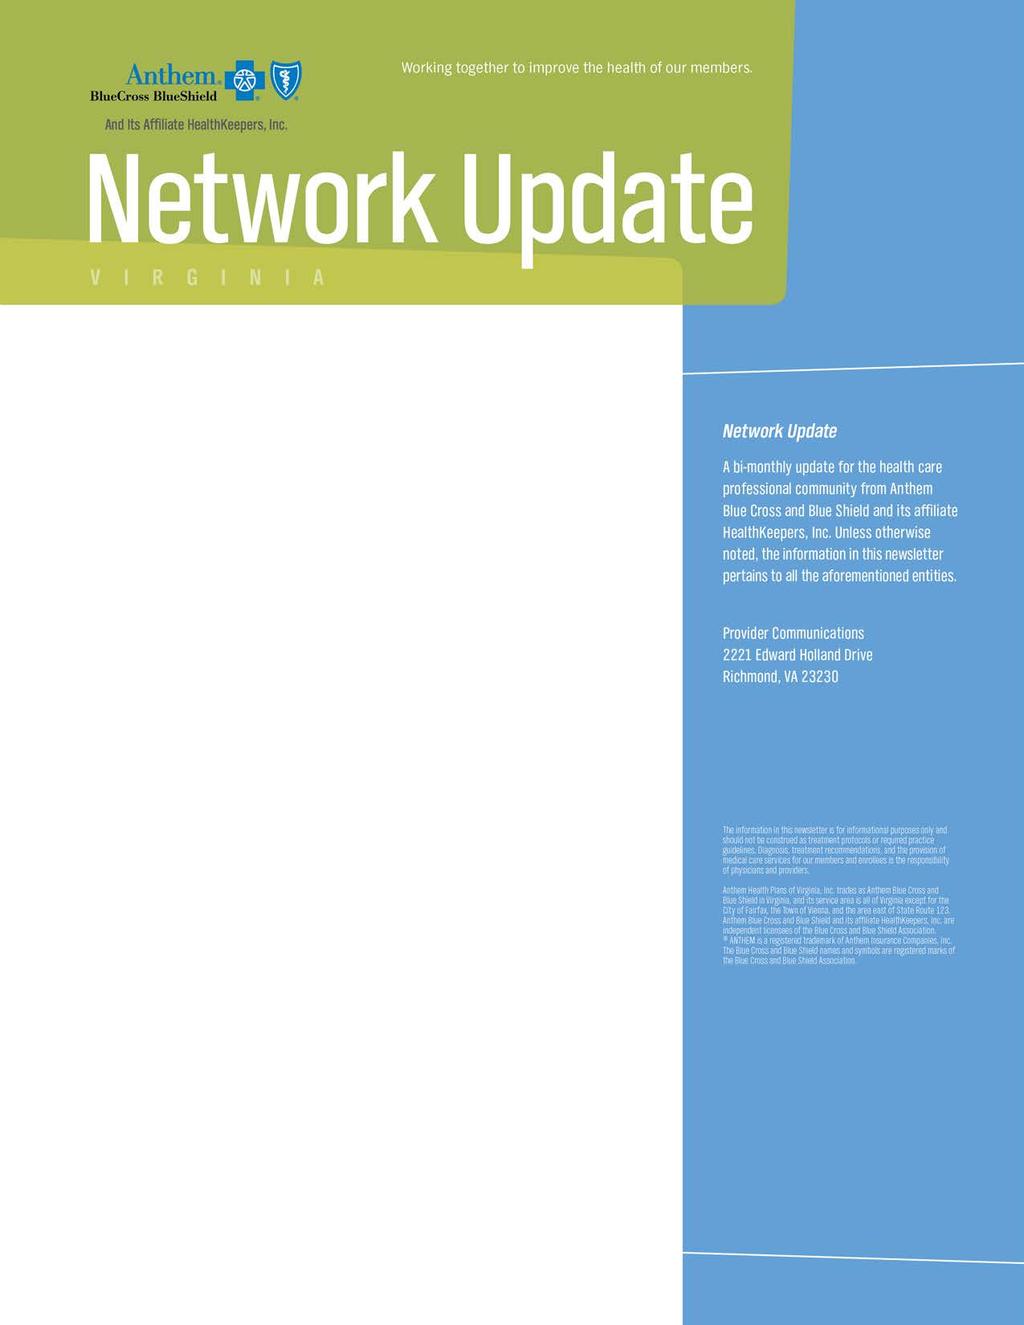 May 2015 SPECIAL EDITION In this issue Page Announcements May 2015 Network Update addresses transition to AIM Specialty Health ; new incentive opportunity regarding health assessments for members